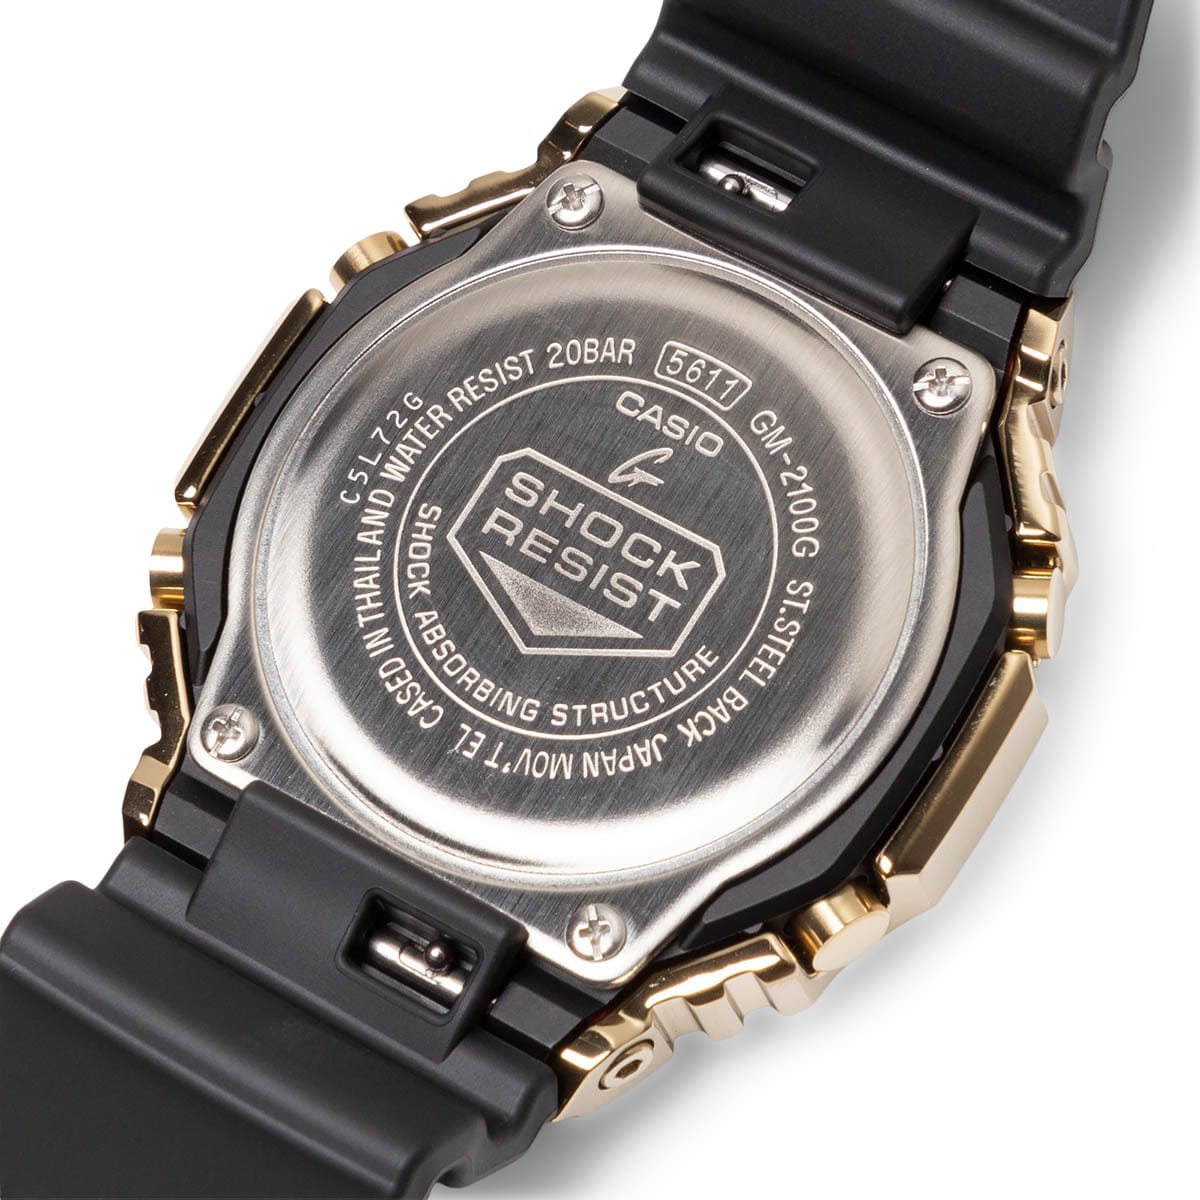 Bodega Store Watches BLACK/GOLD / O/S GM2100G-1A9